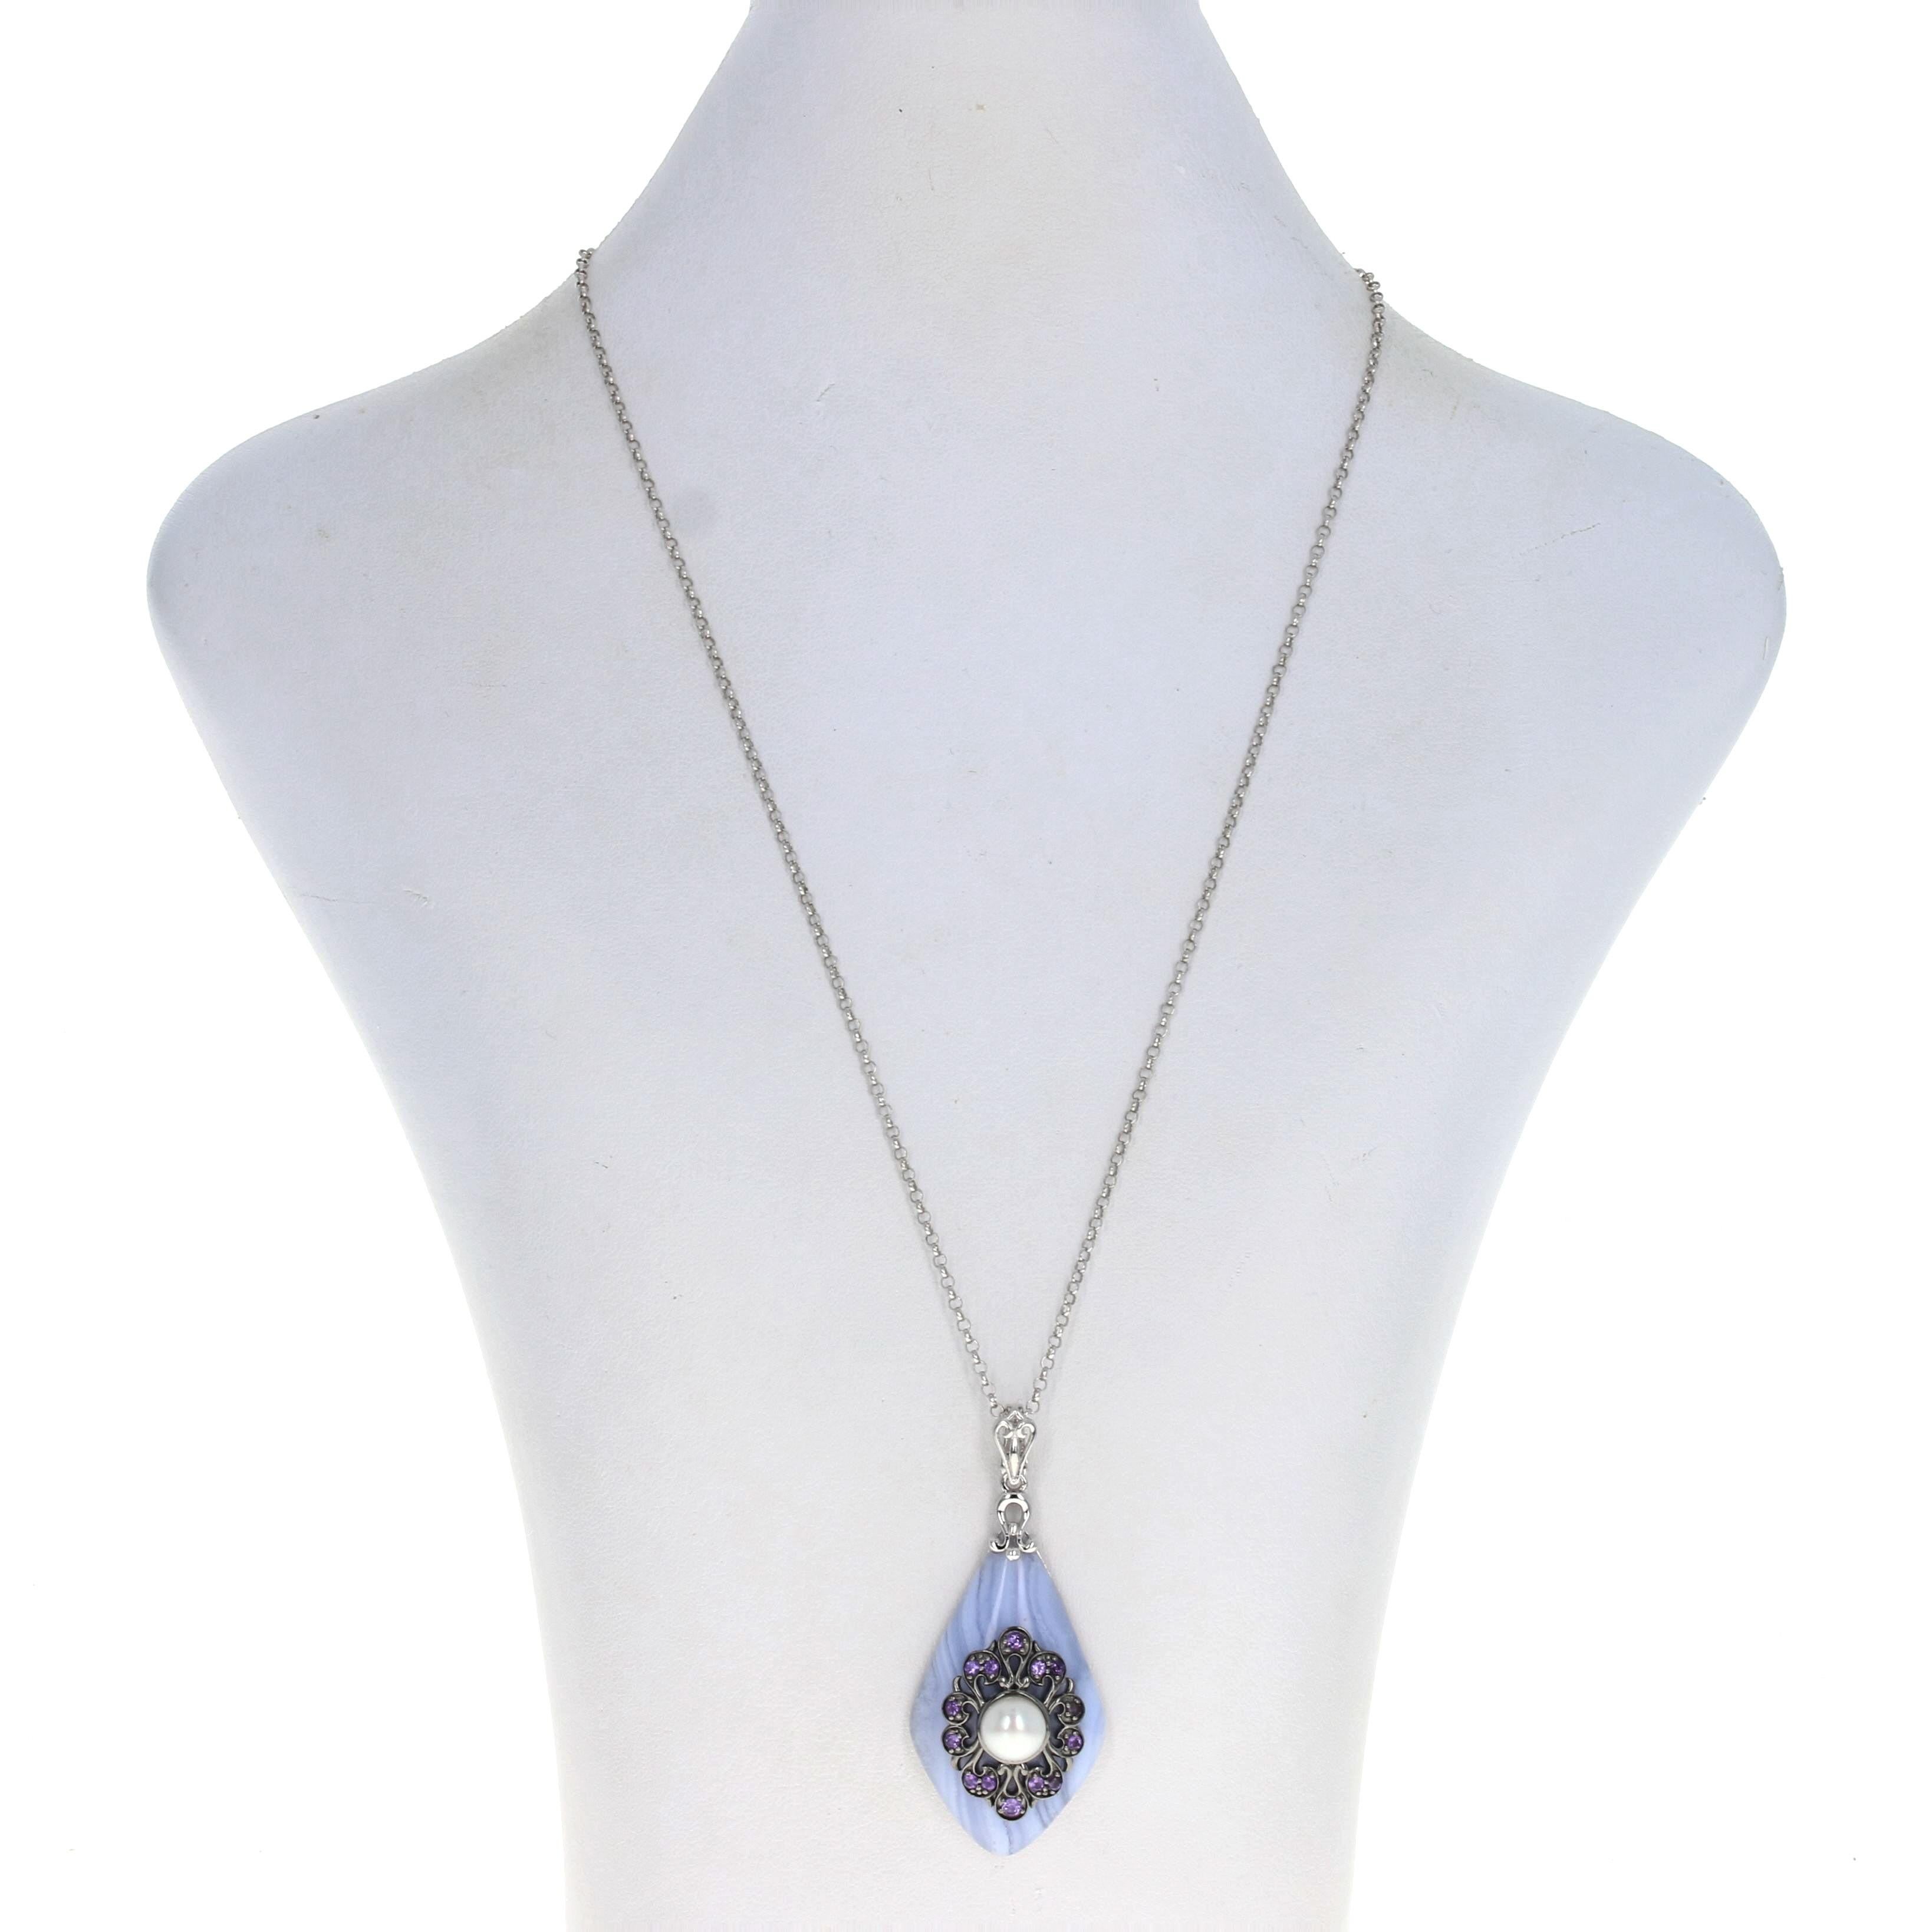 Retail Price: $747.50

Brand: Carlo Viani

Metal Content: Sterling Silver

Stone Information
Genuine Freshwater Pearl
Color: White

Genuine Amethysts
Total Carats: .70ctw
Cut: Round
Color: Purple

Genuine Lacy Agate
Color: Purple

Pendant Style: